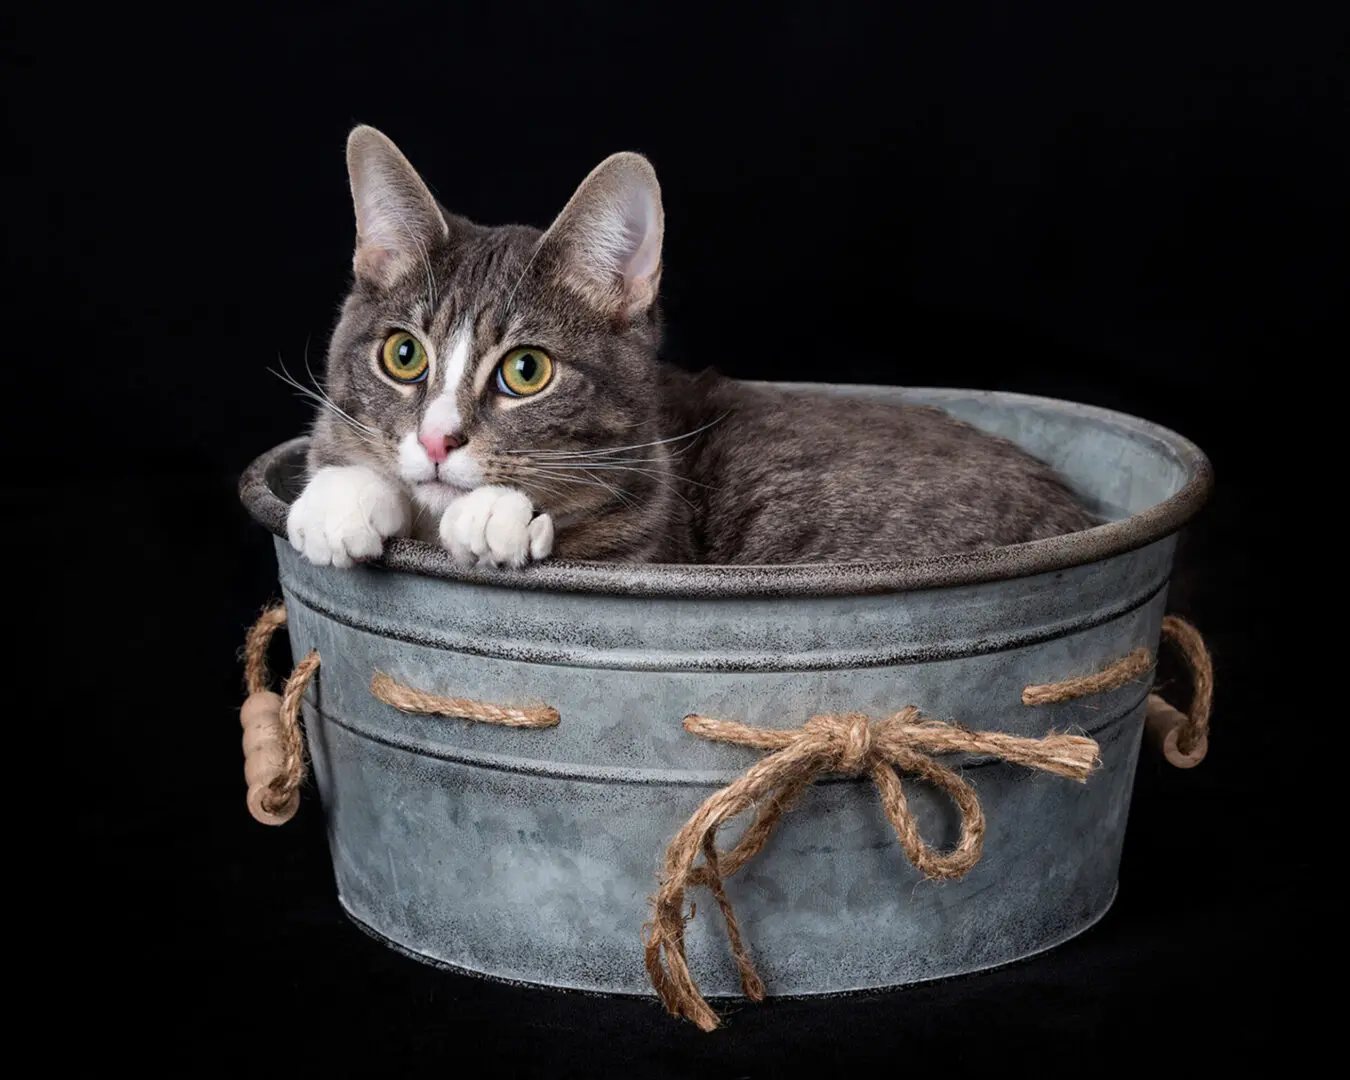 A gray cat in a metal tub